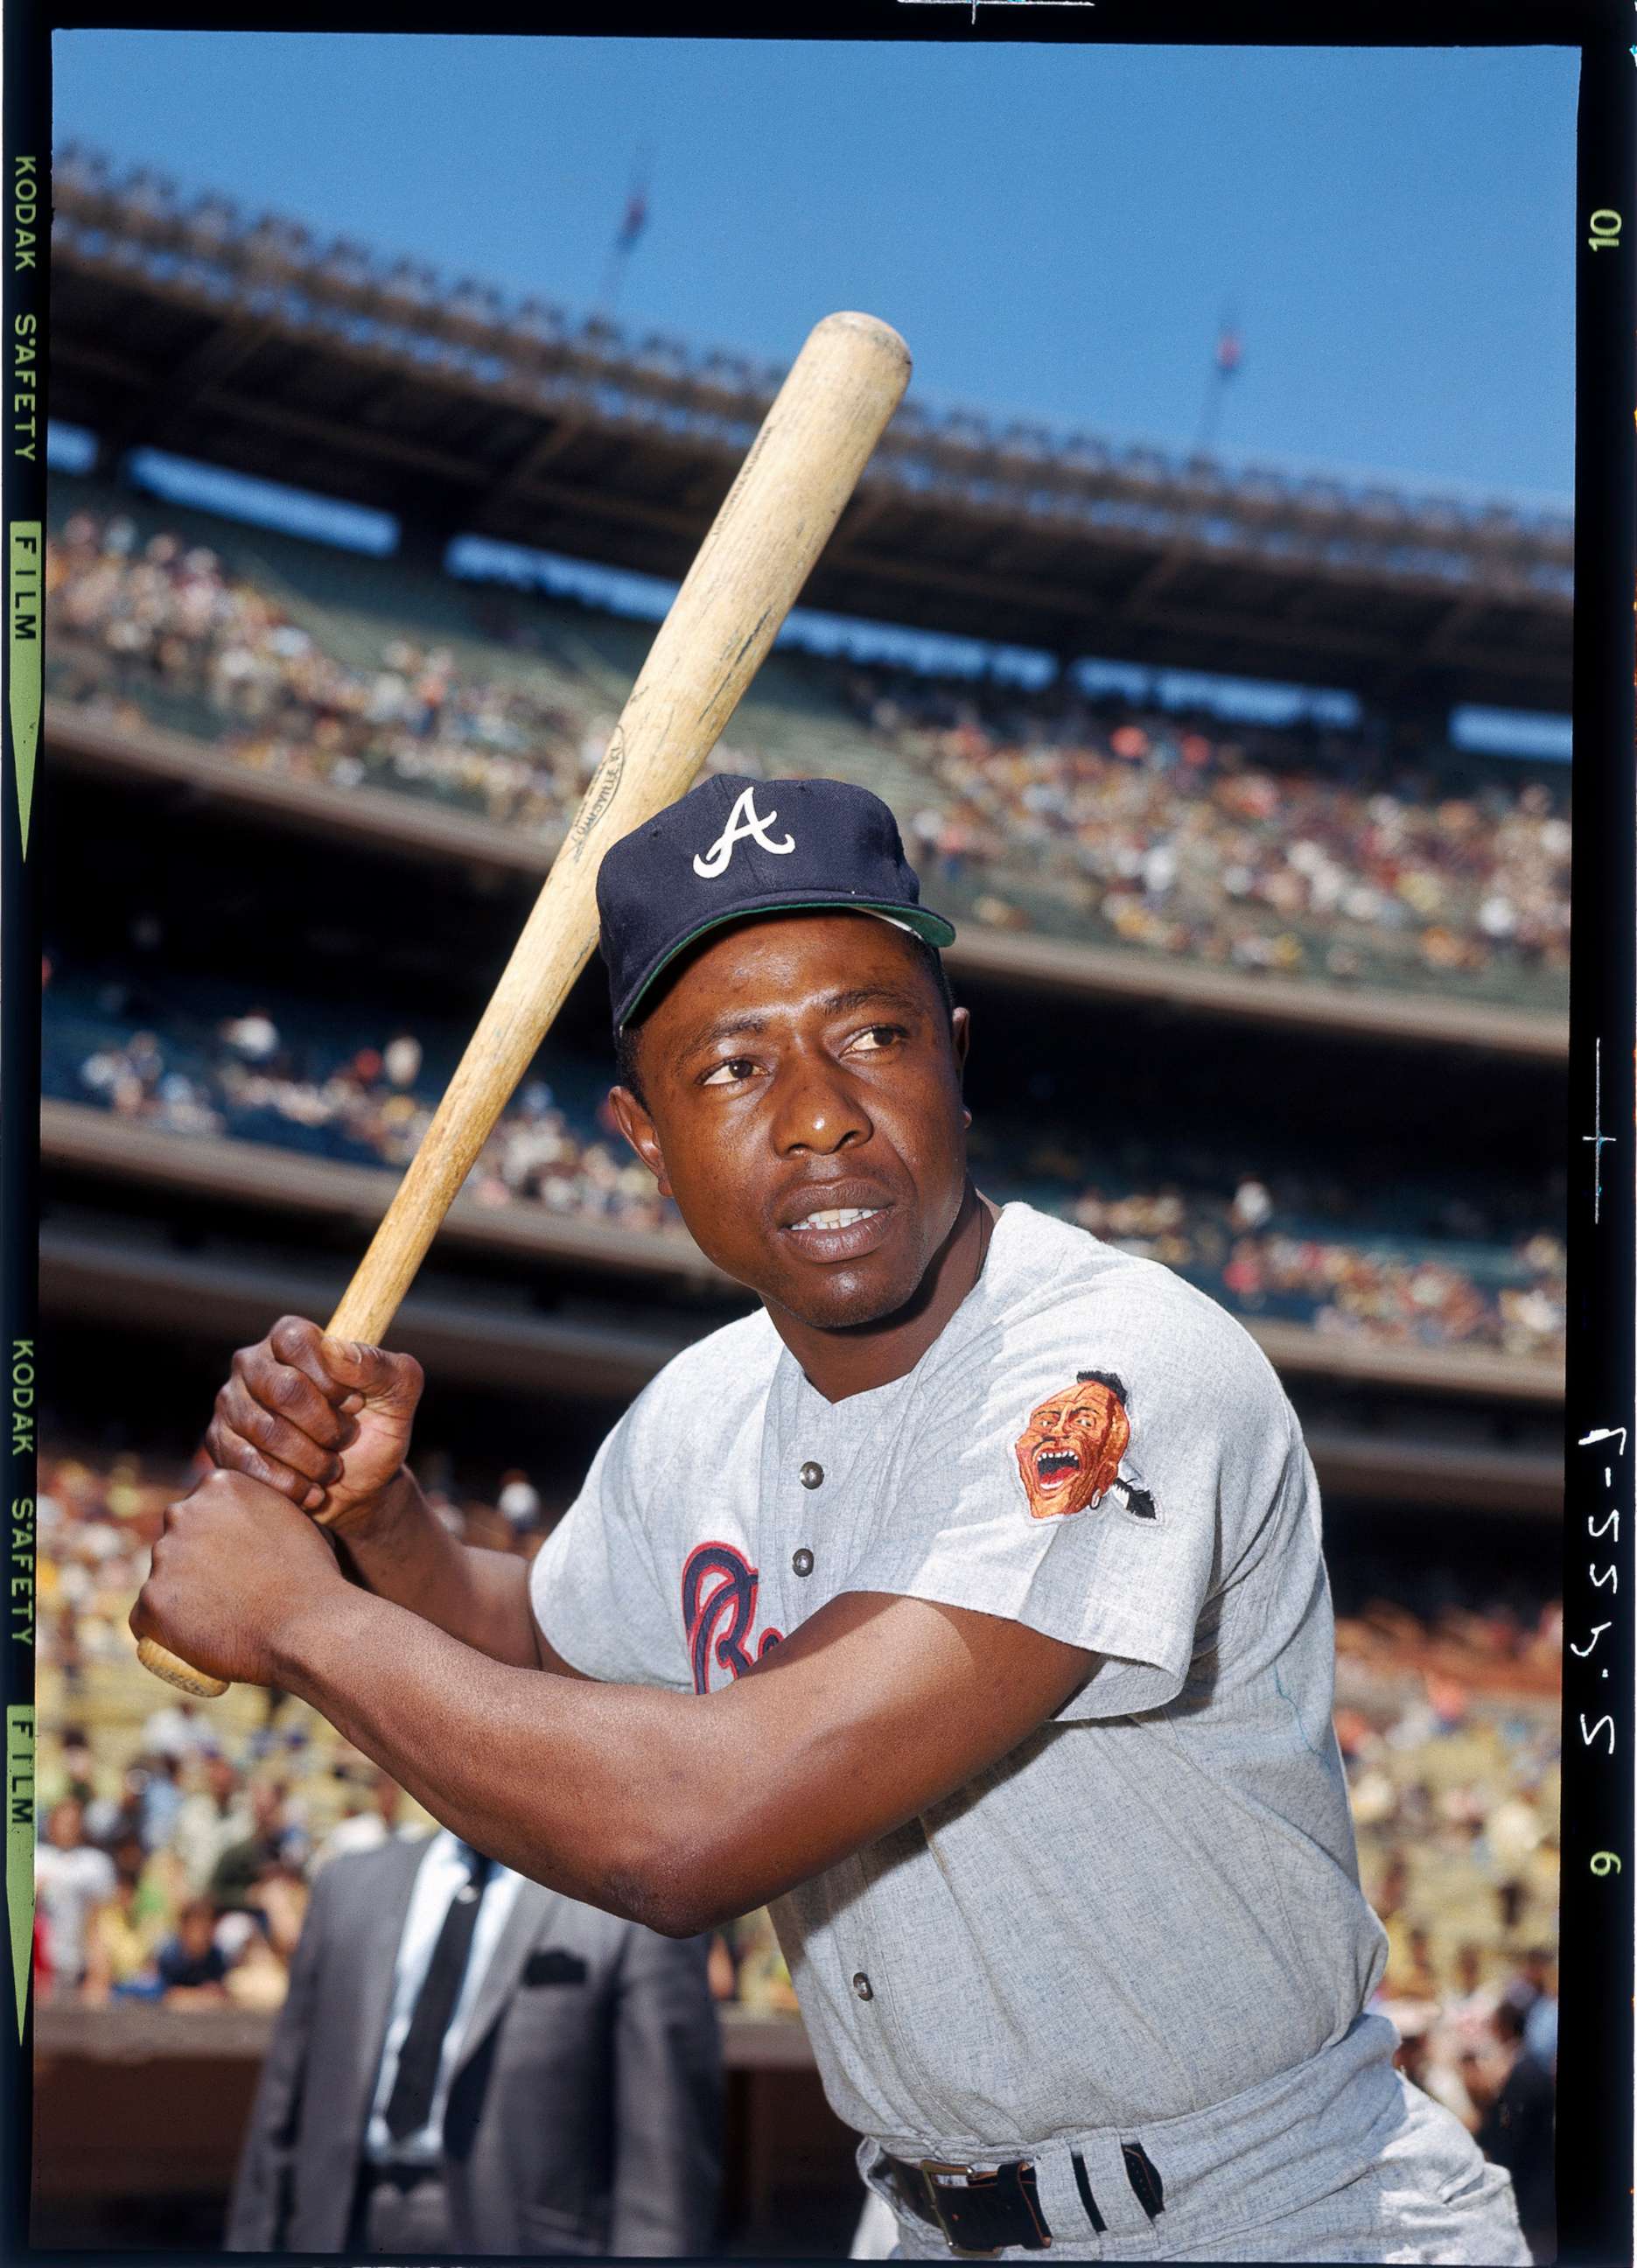 Baseball legend Hank Aaron, who played for Braves and Brewers, dies